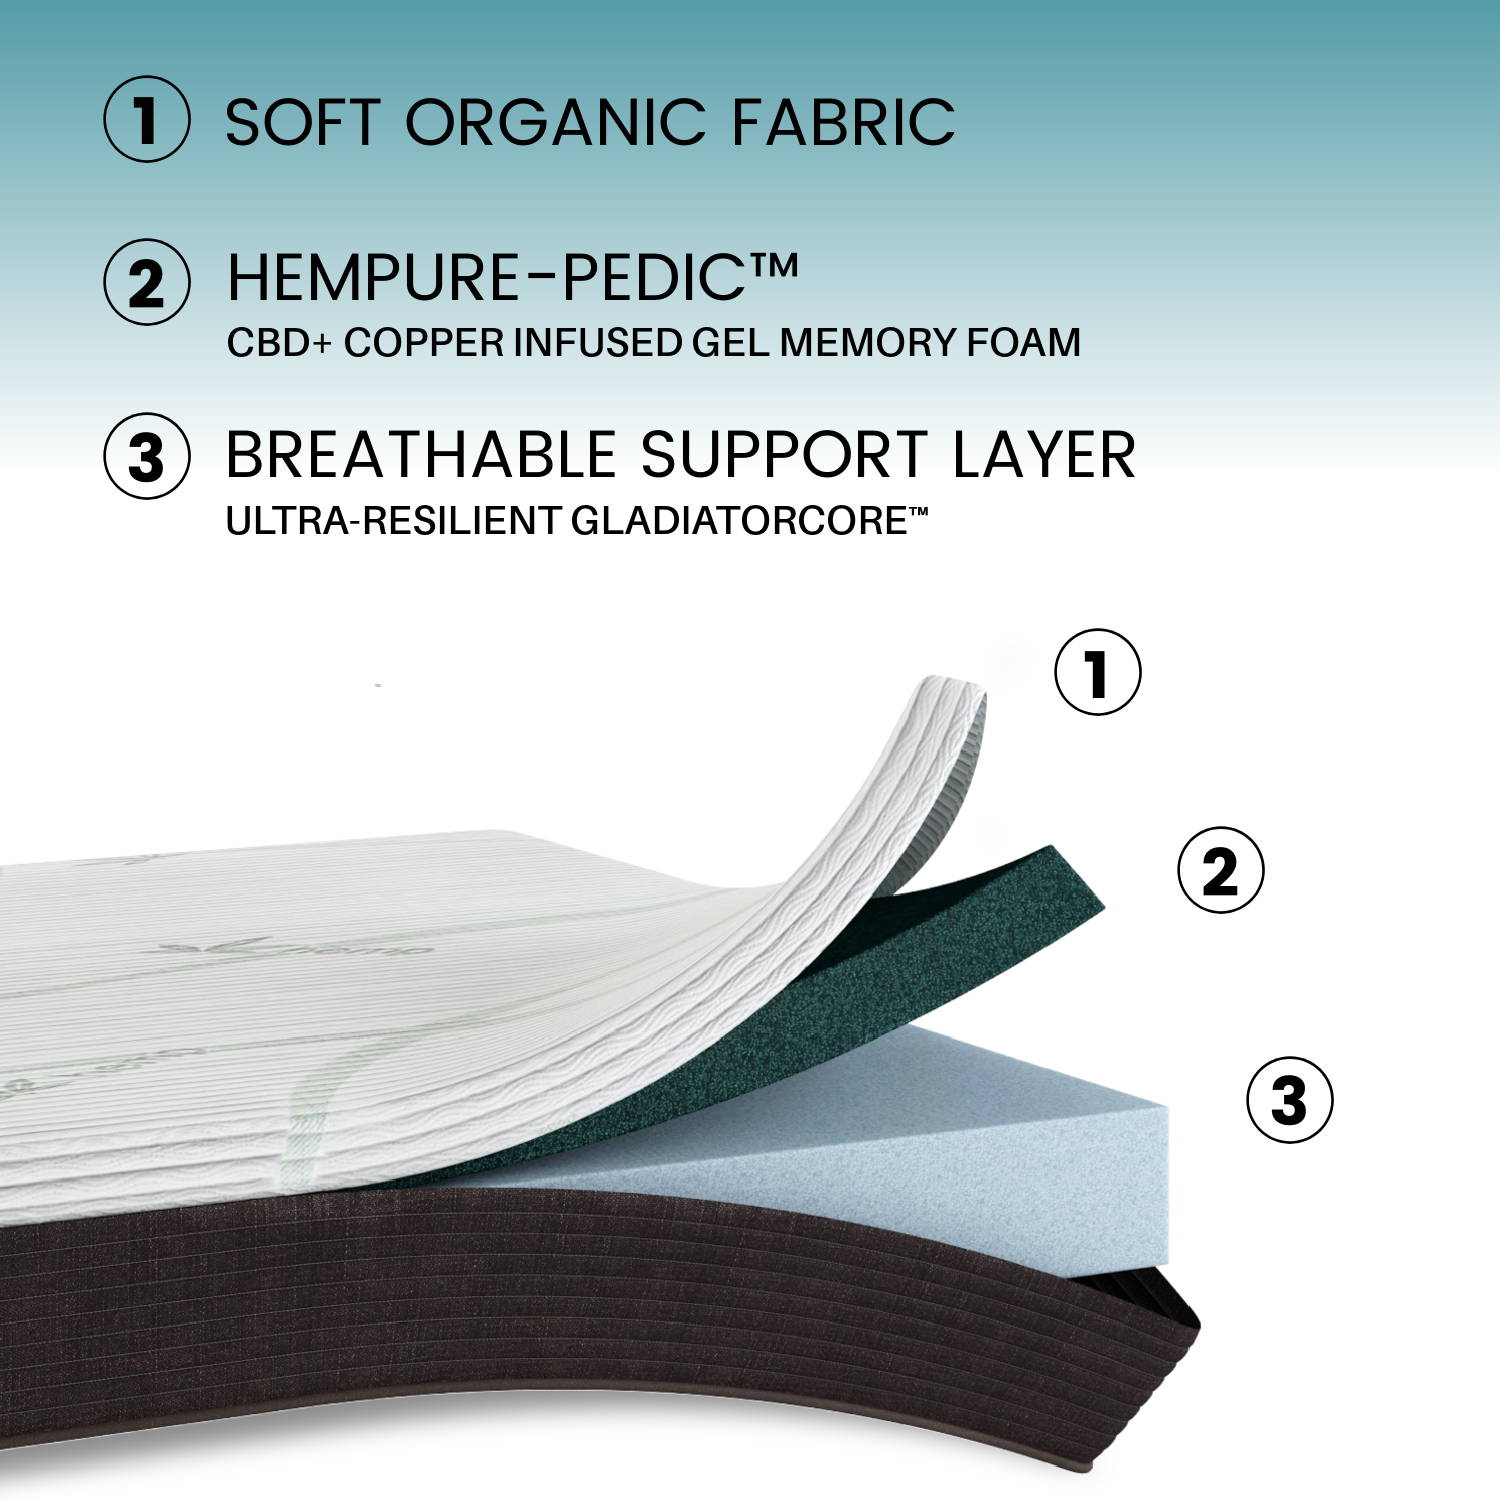 Open mattress with layers showing: Soft organic hemp fabric, CBD and copper-infused cooling memory foam,  and breathable support foam made from plant-based GladiatorCore foam.